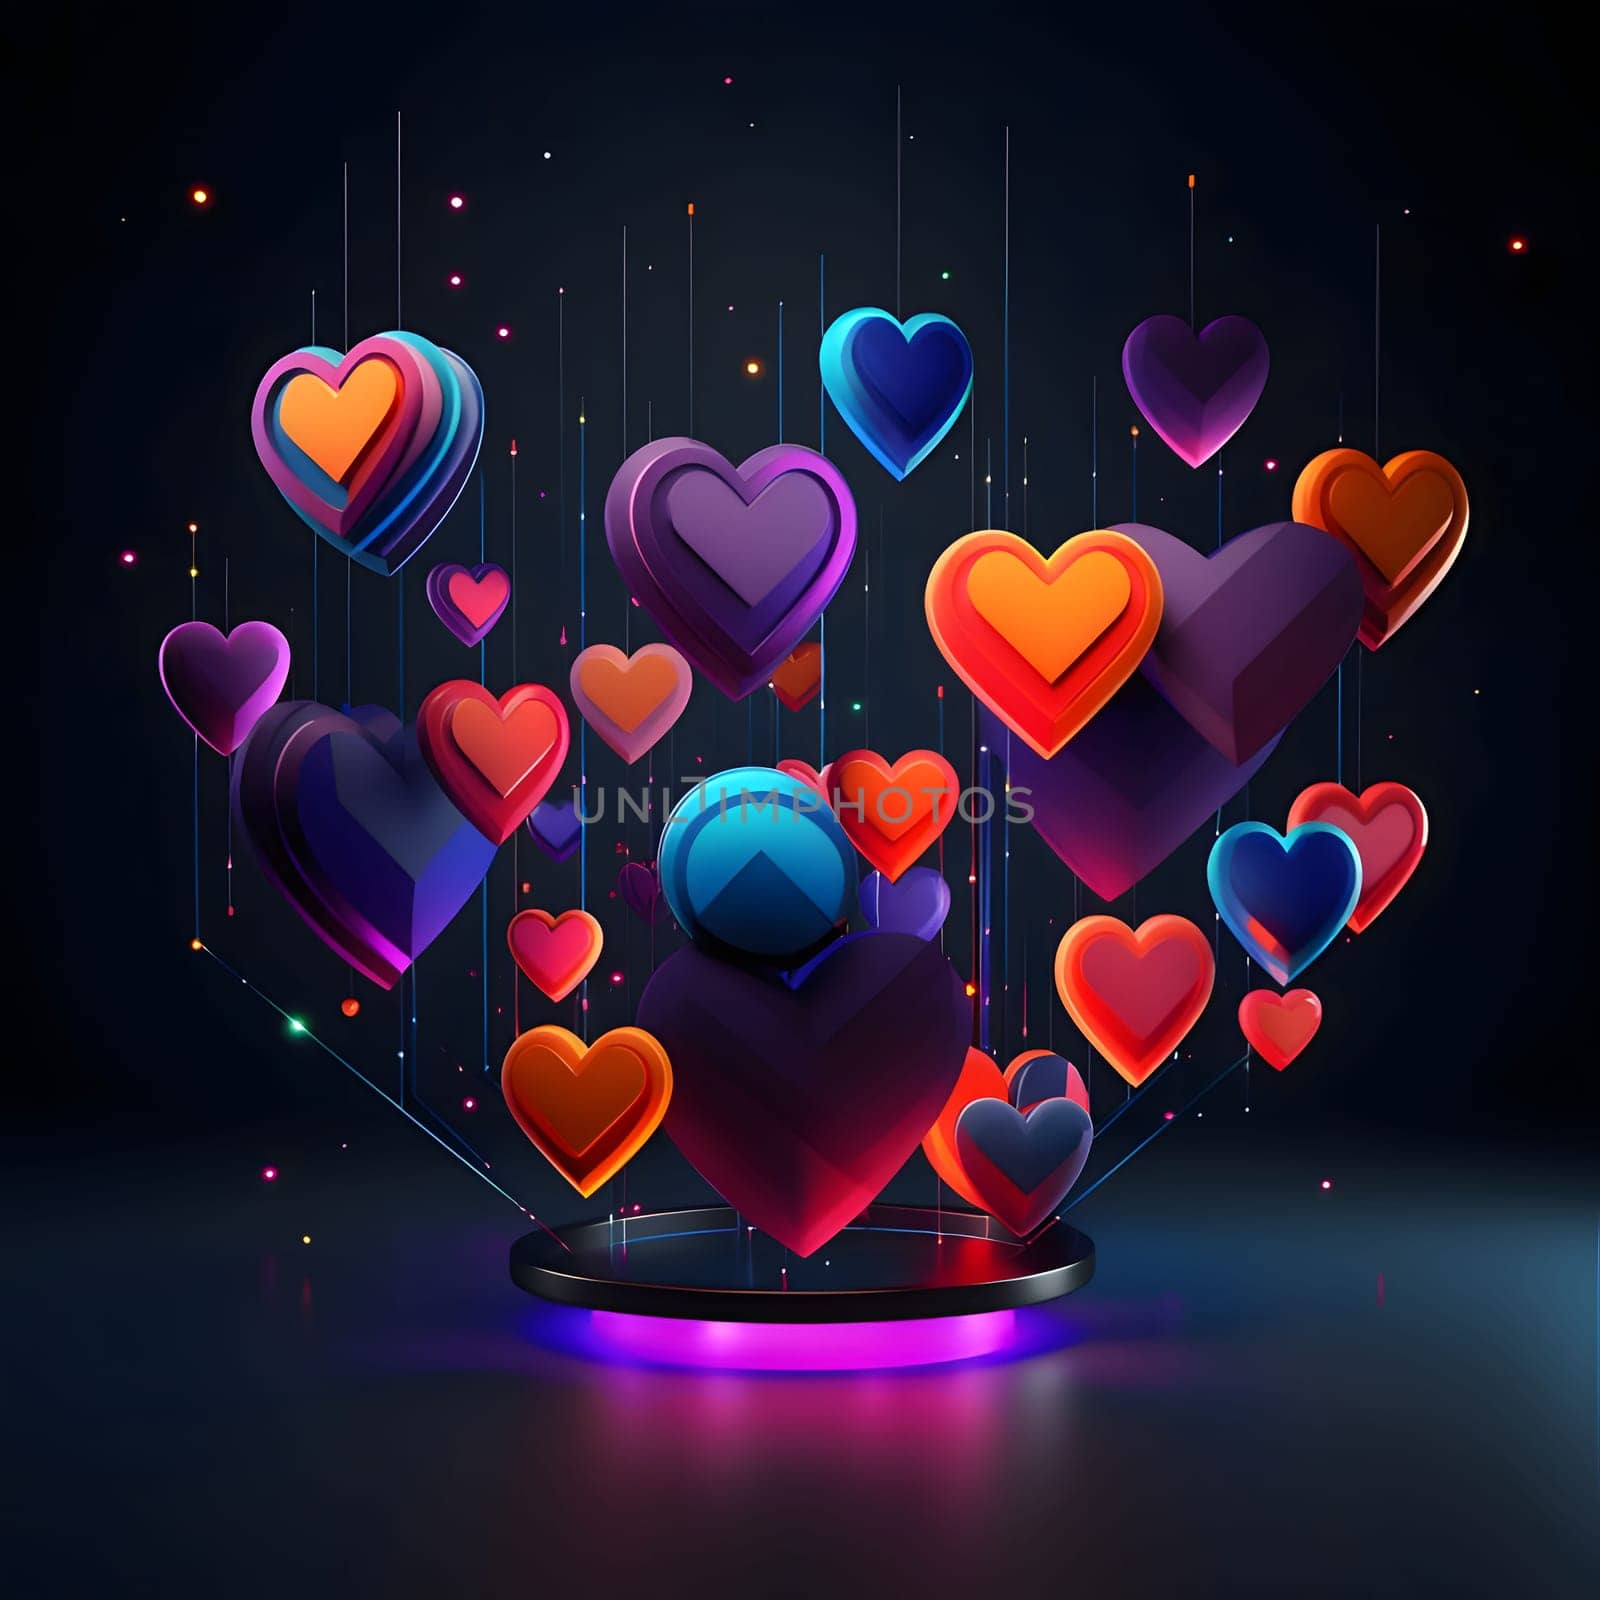 Abstract vertical projector and displayed colorful hearts on a black background. Heart as a symbol of affection and love. The time of falling in love and love.